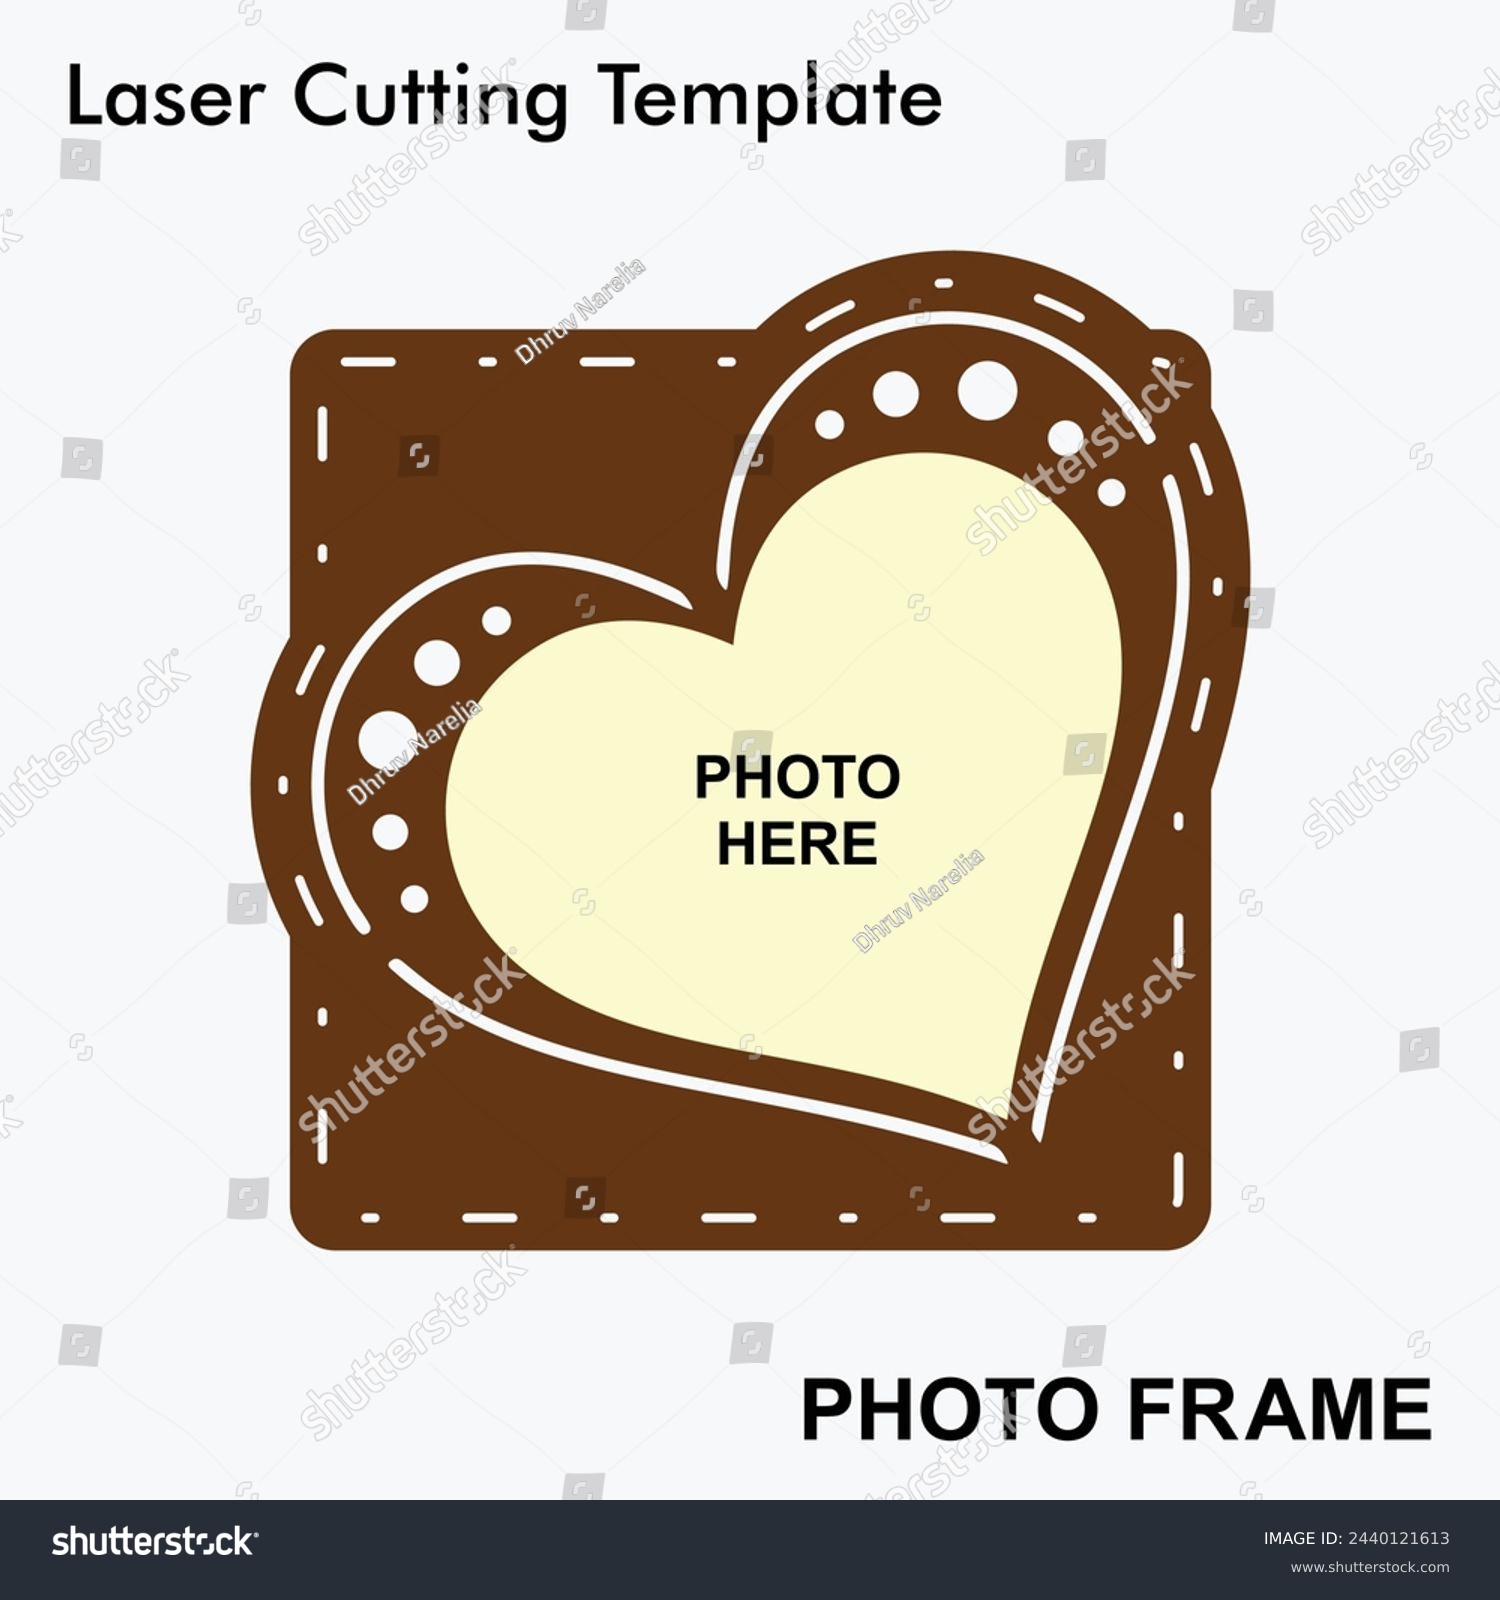 SVG of Creative Heart shaped laser cut photo frame with 1 photo. Home decor wooden sublimation frame template. Suitable for wedding gifts. Laser cut photo frame template design for mdf and acrylic cutting. svg